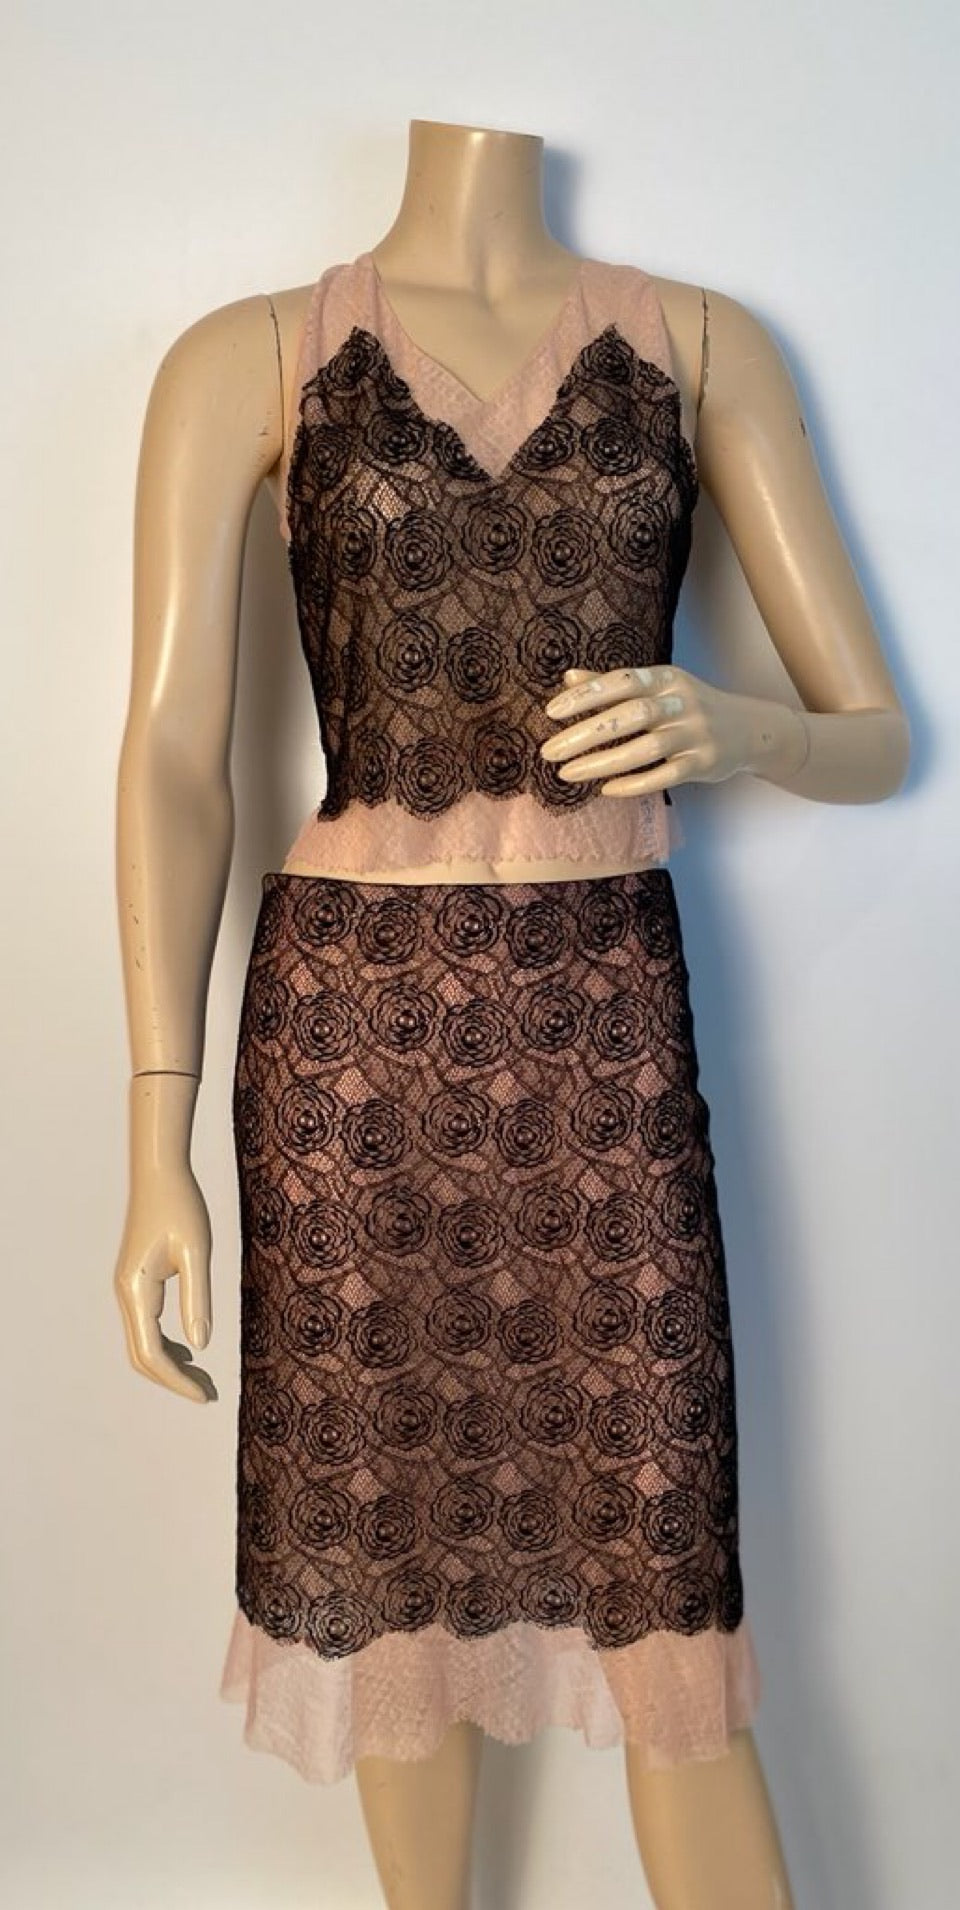 HelensChanel Rare Chanel 03p, 2003 Spring Camellia Flower Pink Black Lace Satin Blouse with Matching Skirt Set FR 36 US 4